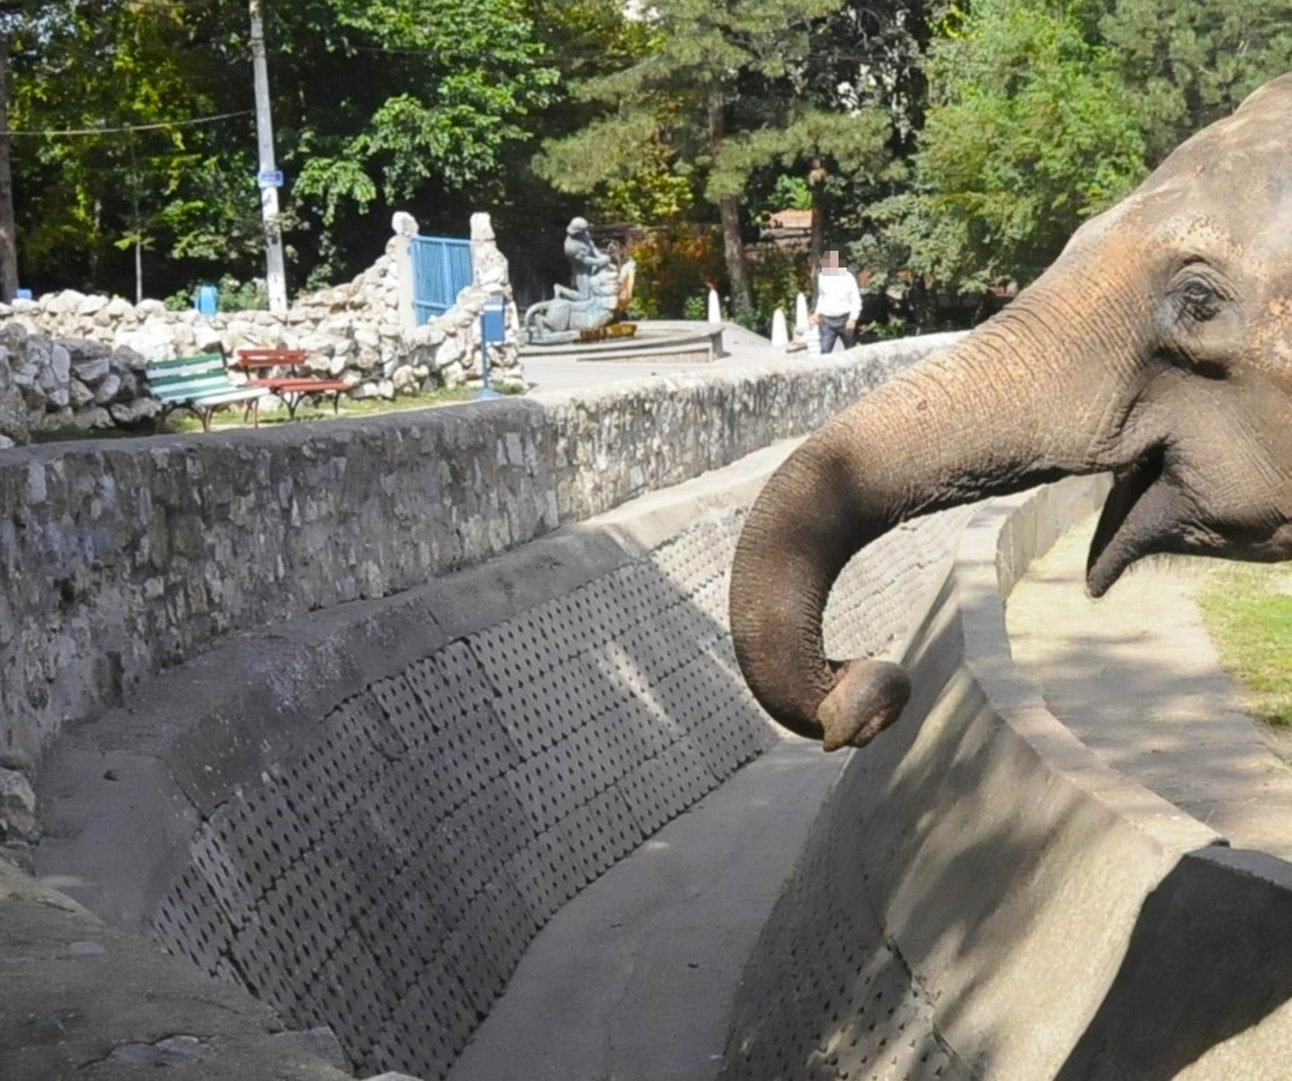 An elephant reaches out its trunk over the side of its enclosure, where people are standing